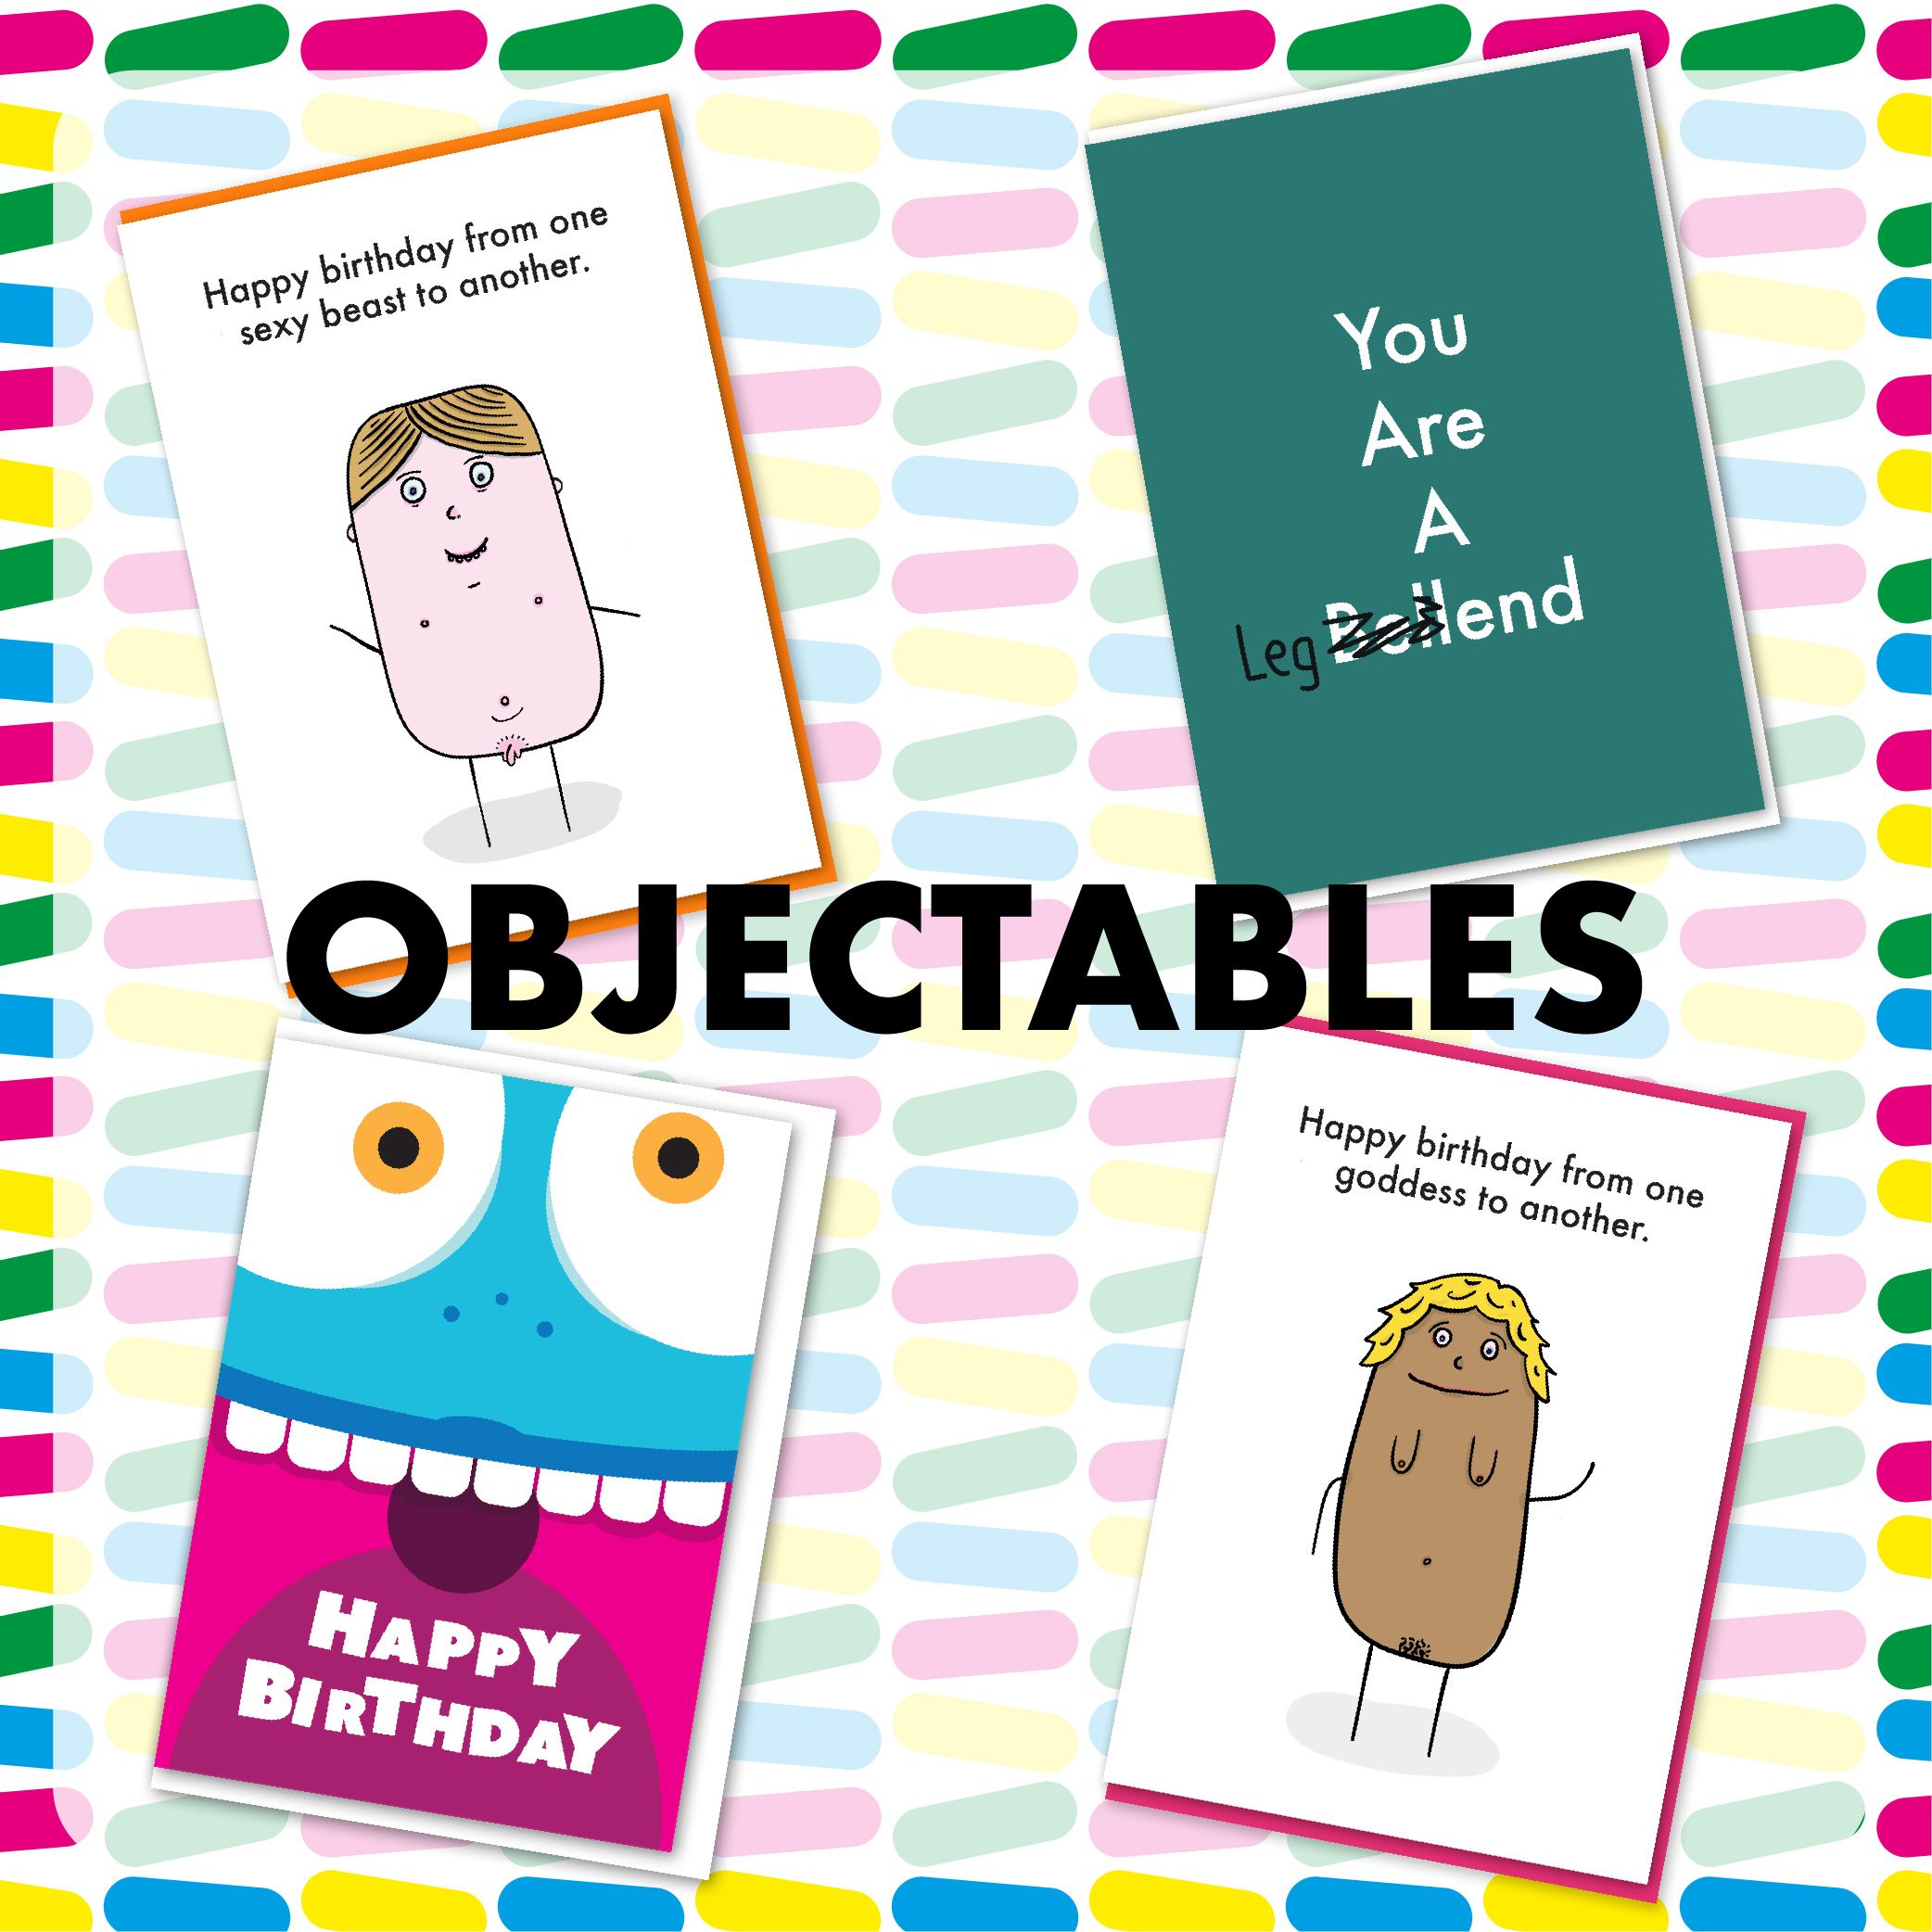 Objectables